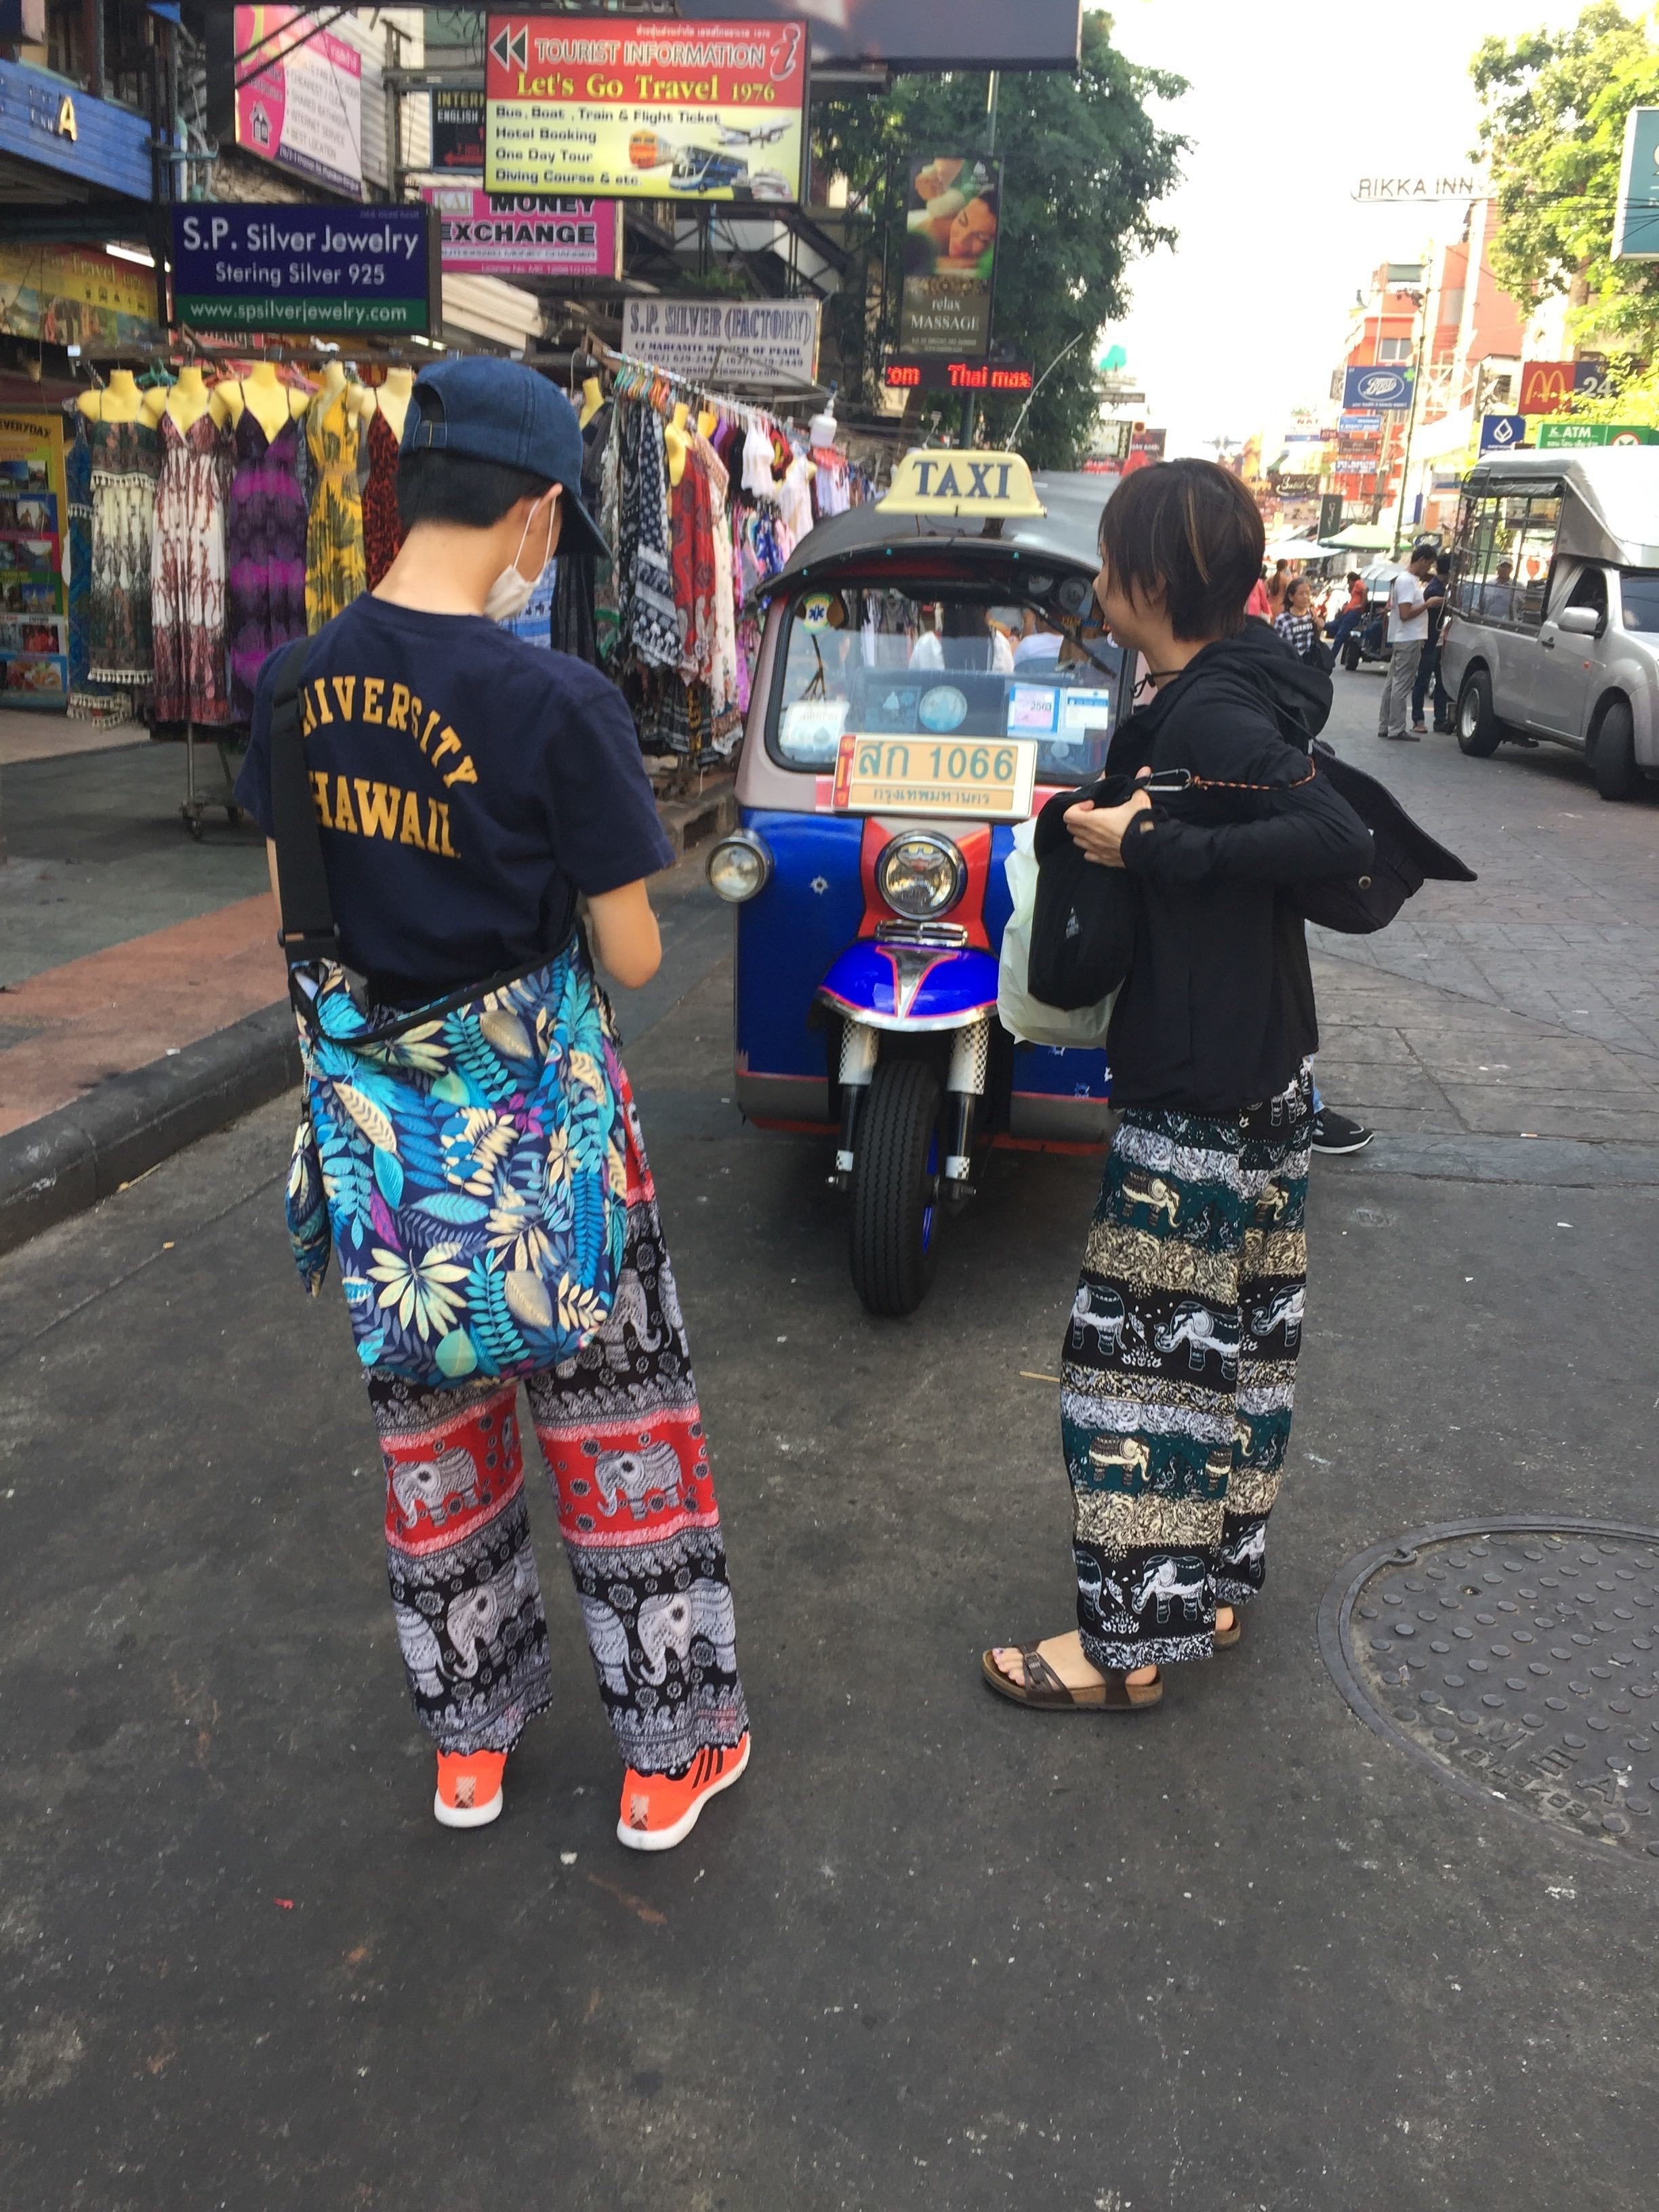 Want to look like a local in Thailand? Don't wear 'elephant pants